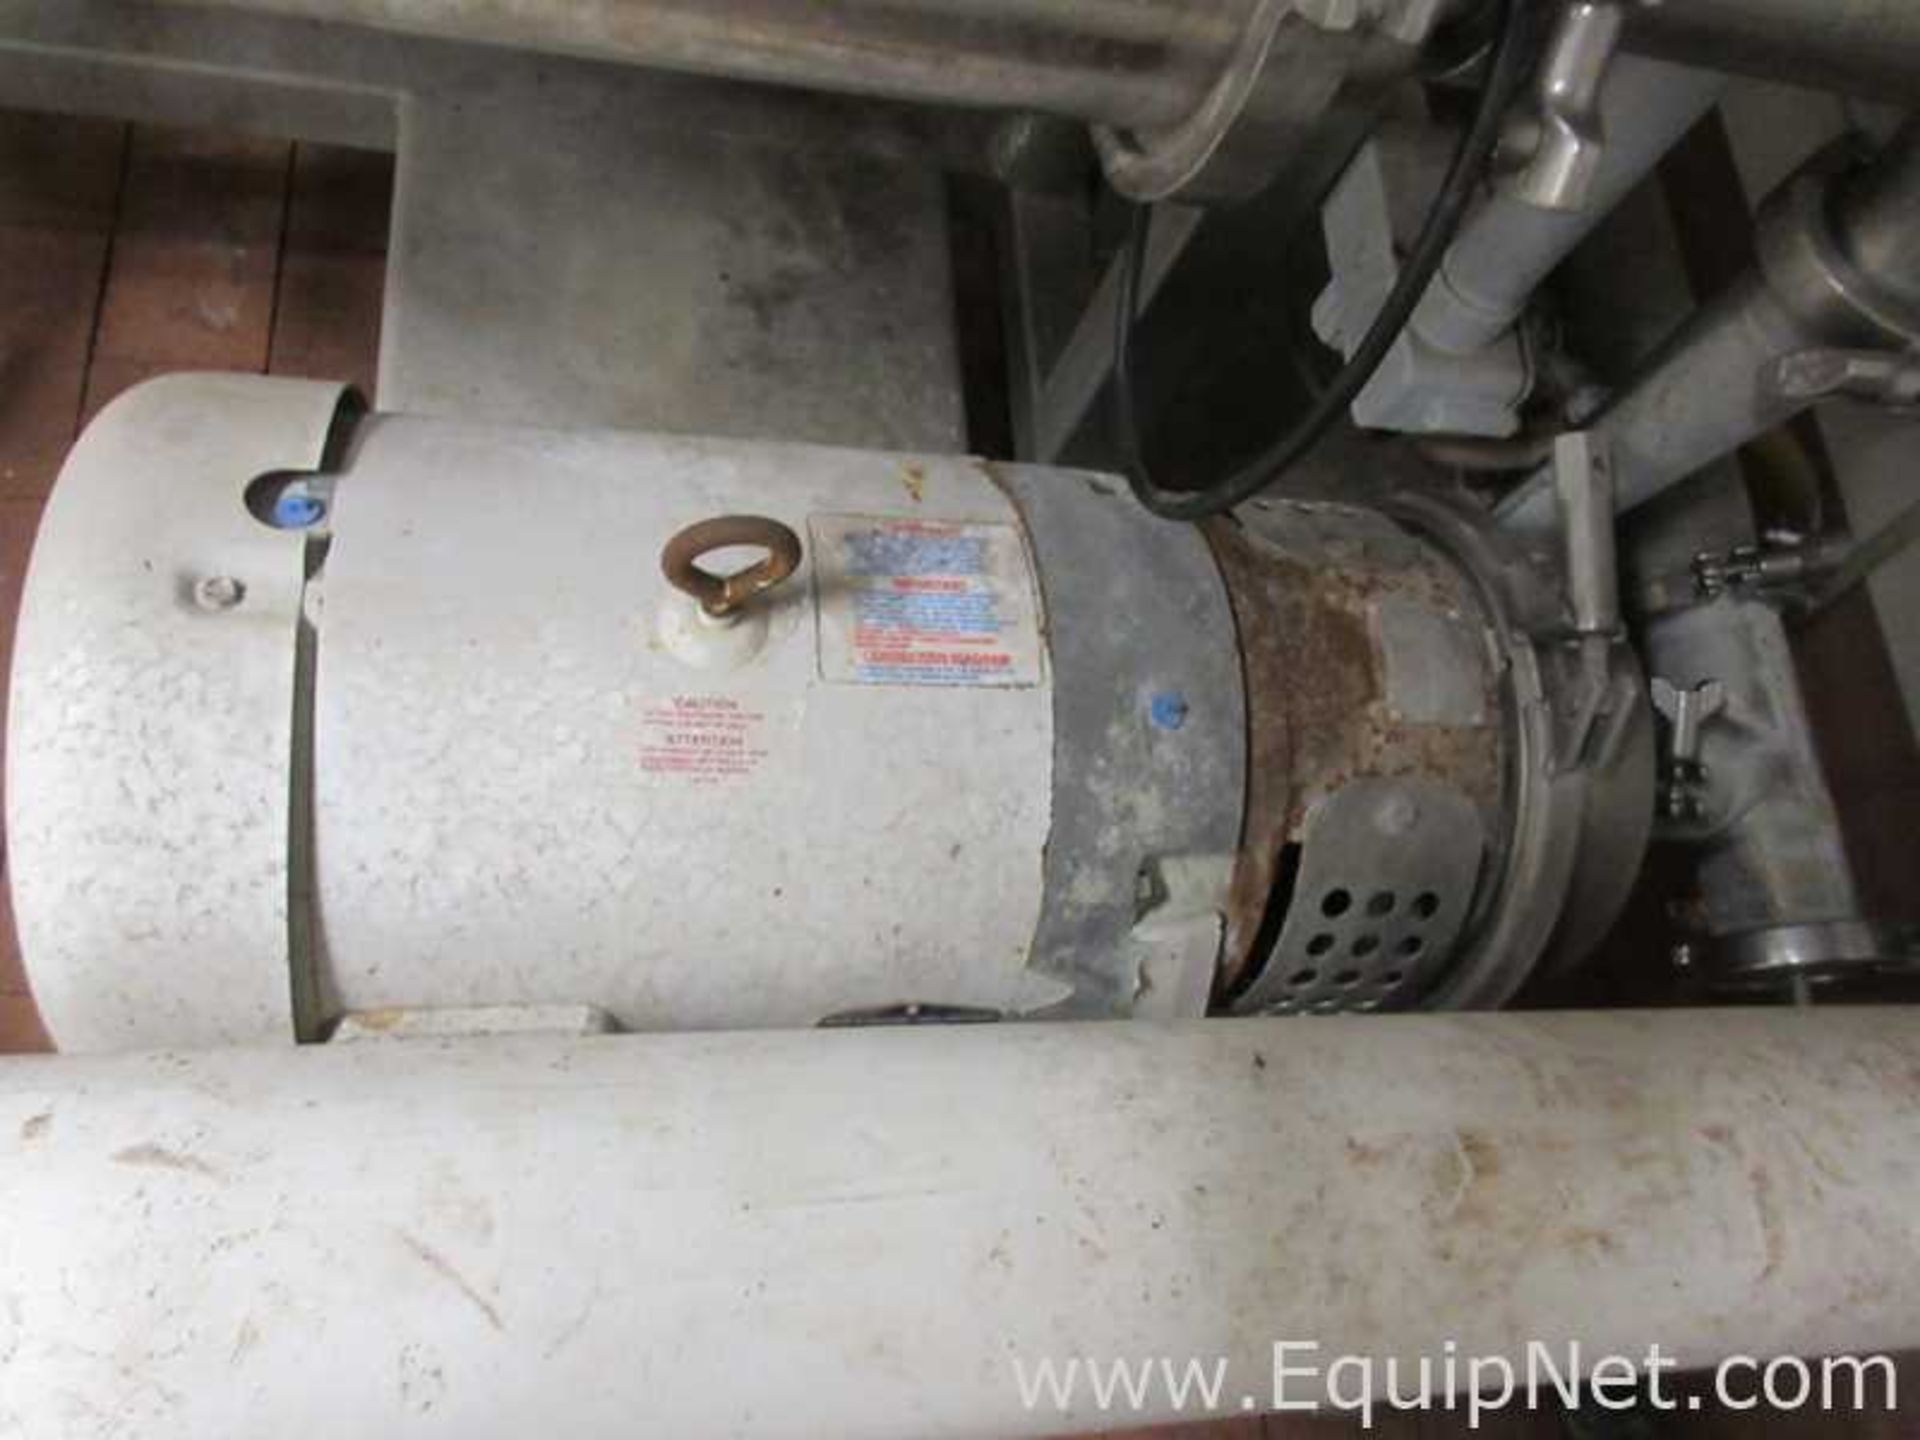 EQUIPNET LISTING #775980; REMOVAL COST: $15,754.00; DESCRIPTION: CIP System With Three Tanks, - Image 9 of 17